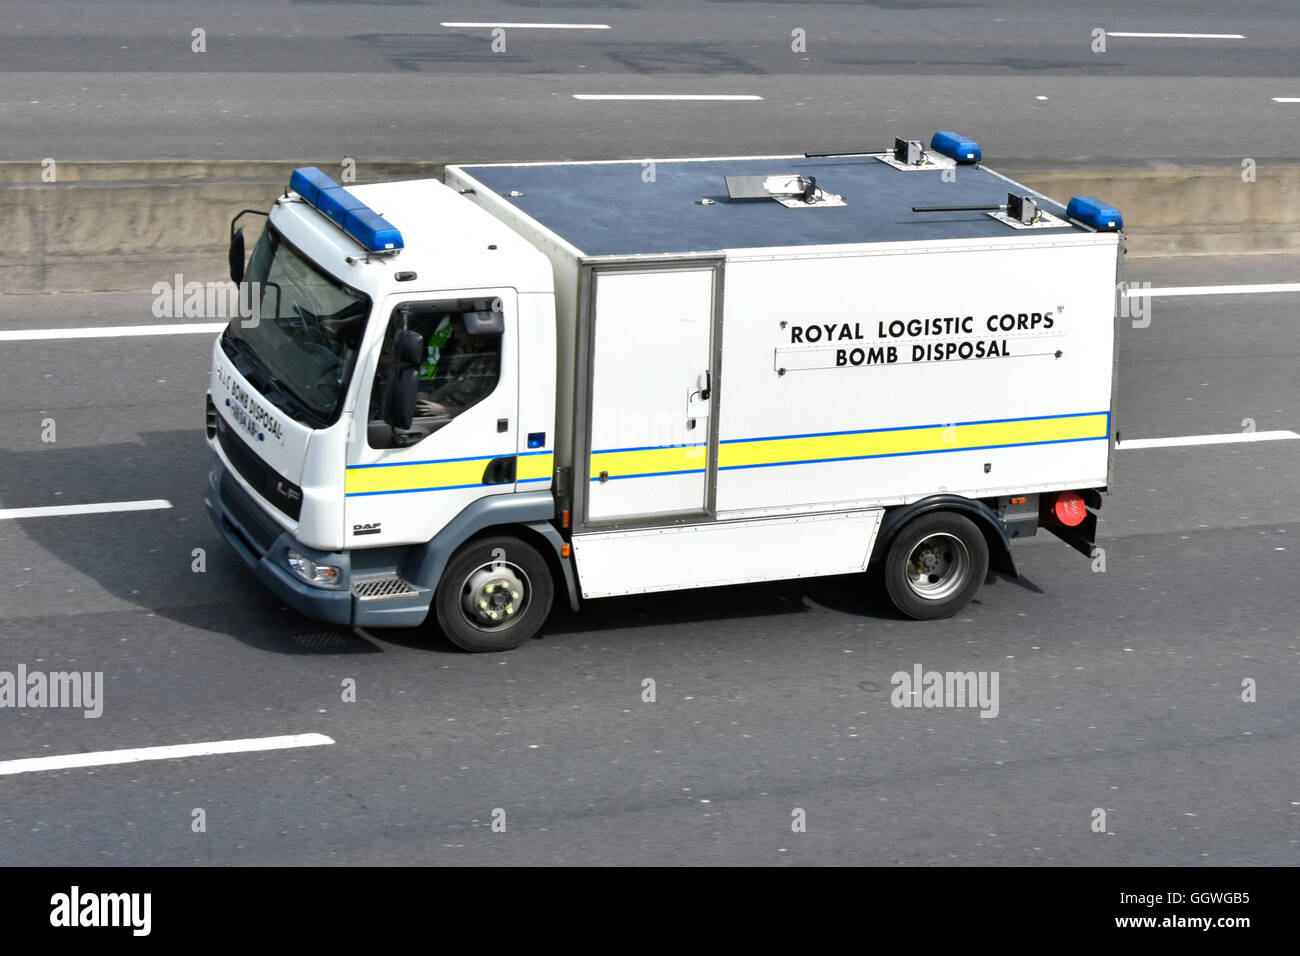 Aerial view British Army Royal Logistic Corps Bomb Disposal lorry truck on Uk motorway England Stock Photo